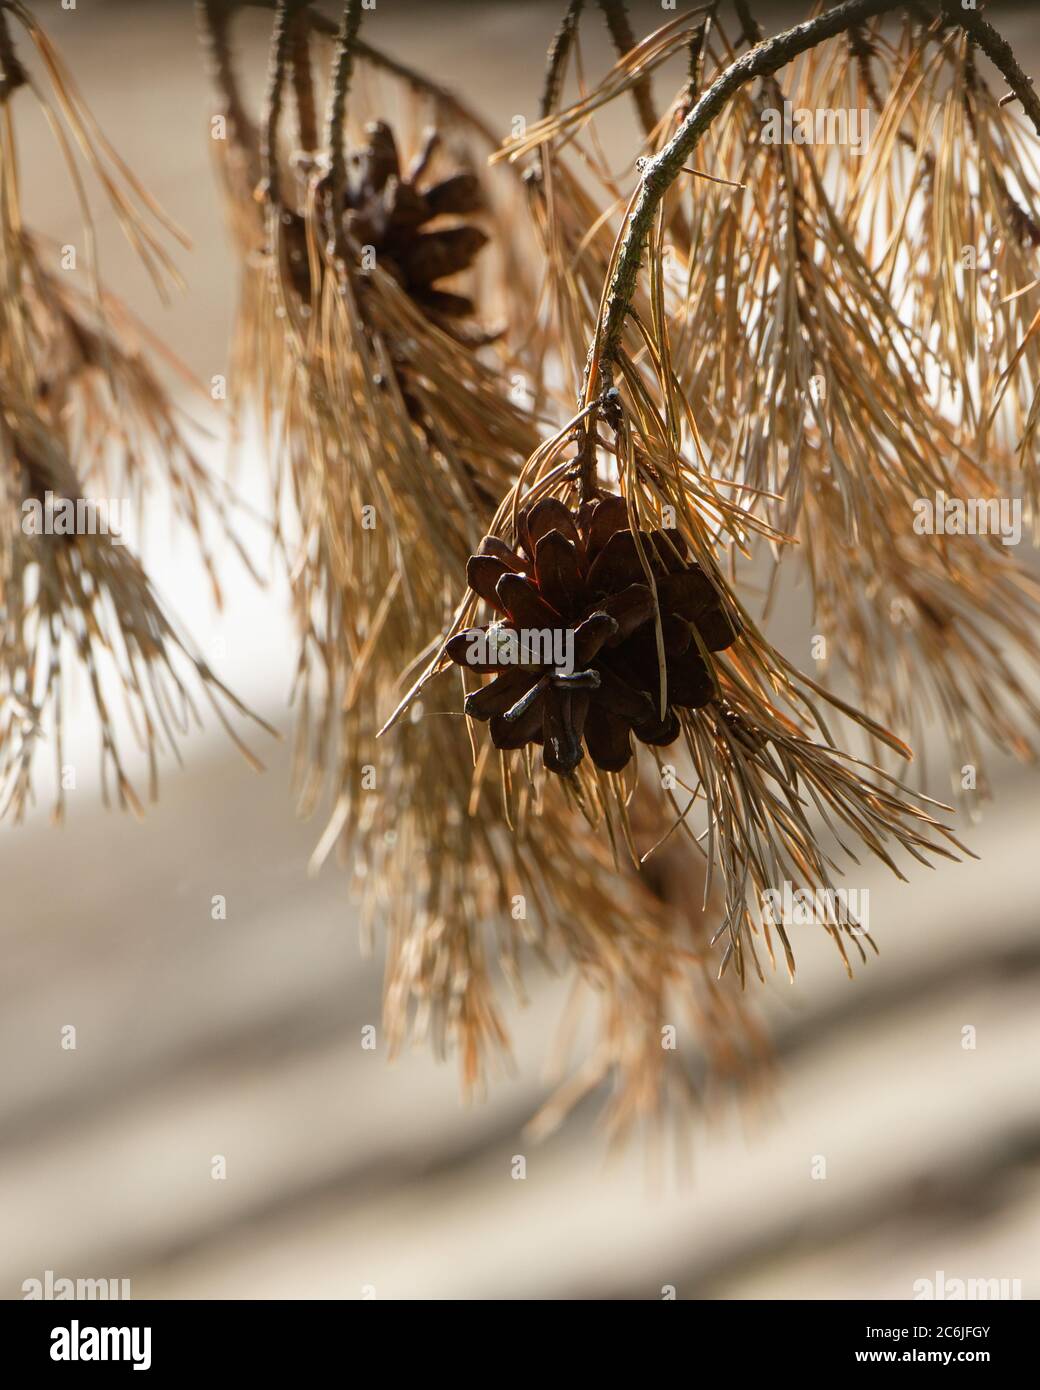 Pine cones hanging from brown needles Stock Photo